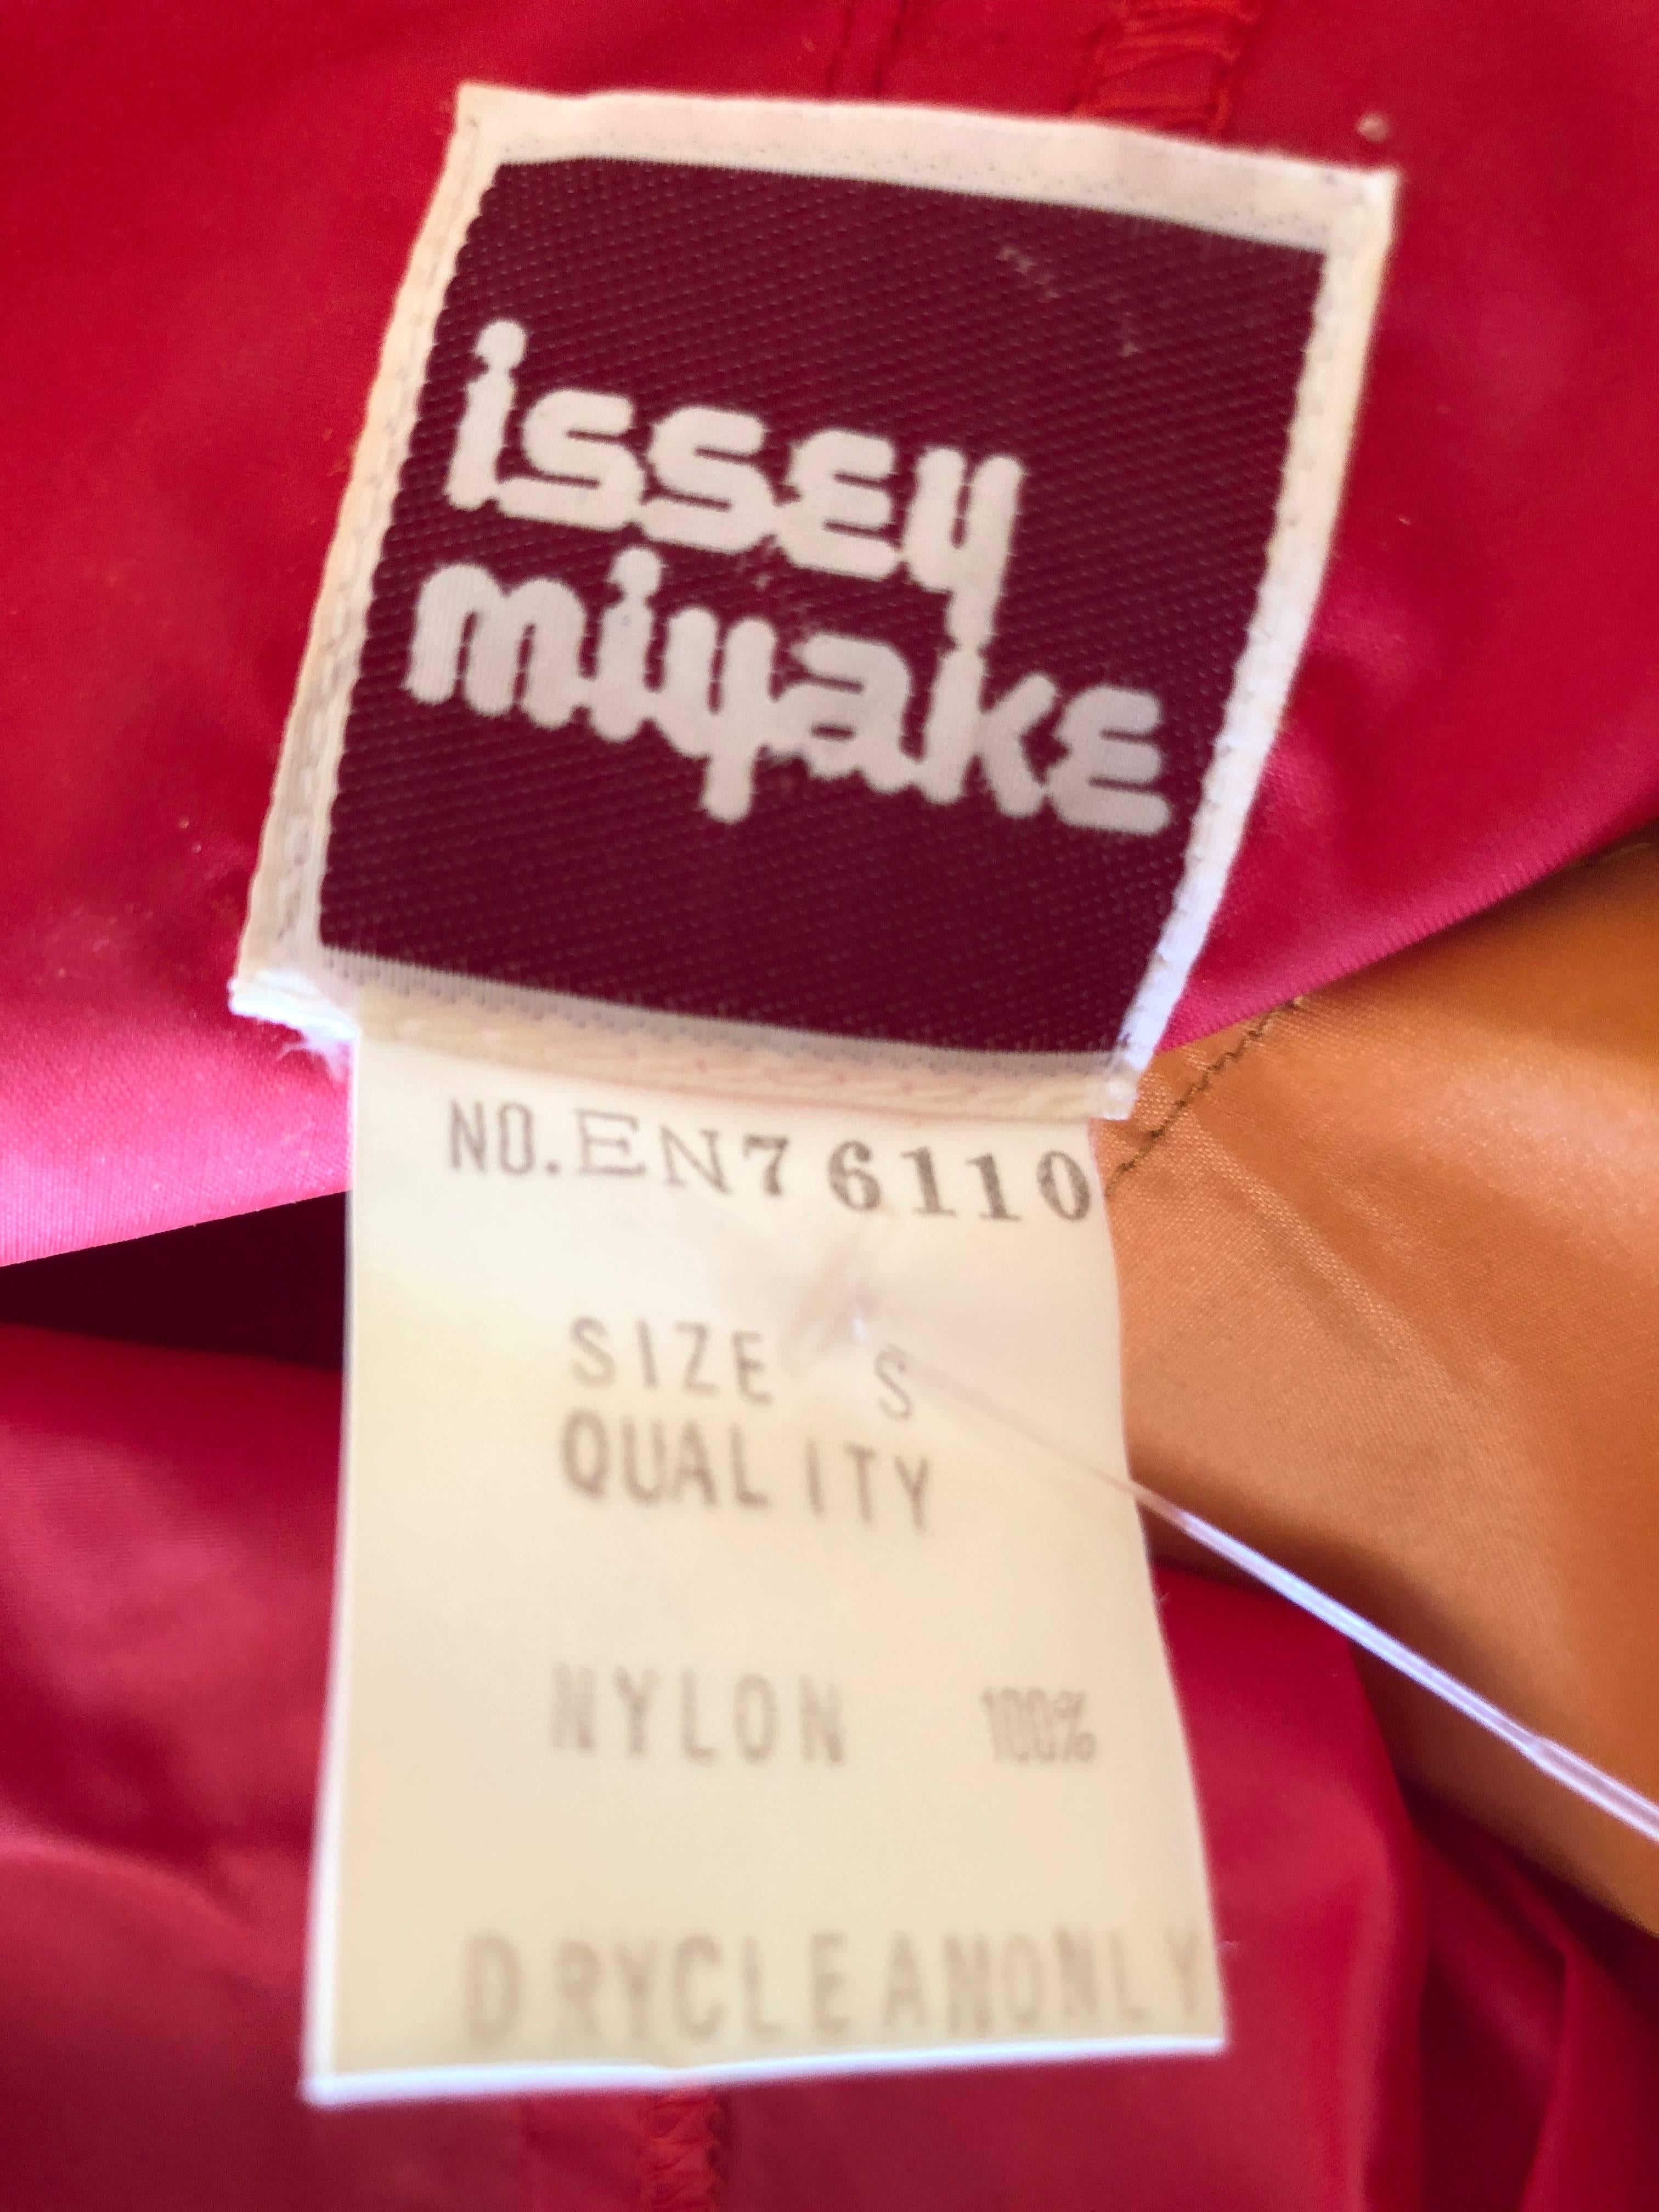 Issey Miyake 1970's Jumpsuit with Matching Trench Coat.
This is a very rare example of Issey's early work in the 1970's which includes a jumpsuit and matching trench coat.
Made of nylon , it is in excellent condition.
Marked size S it runs